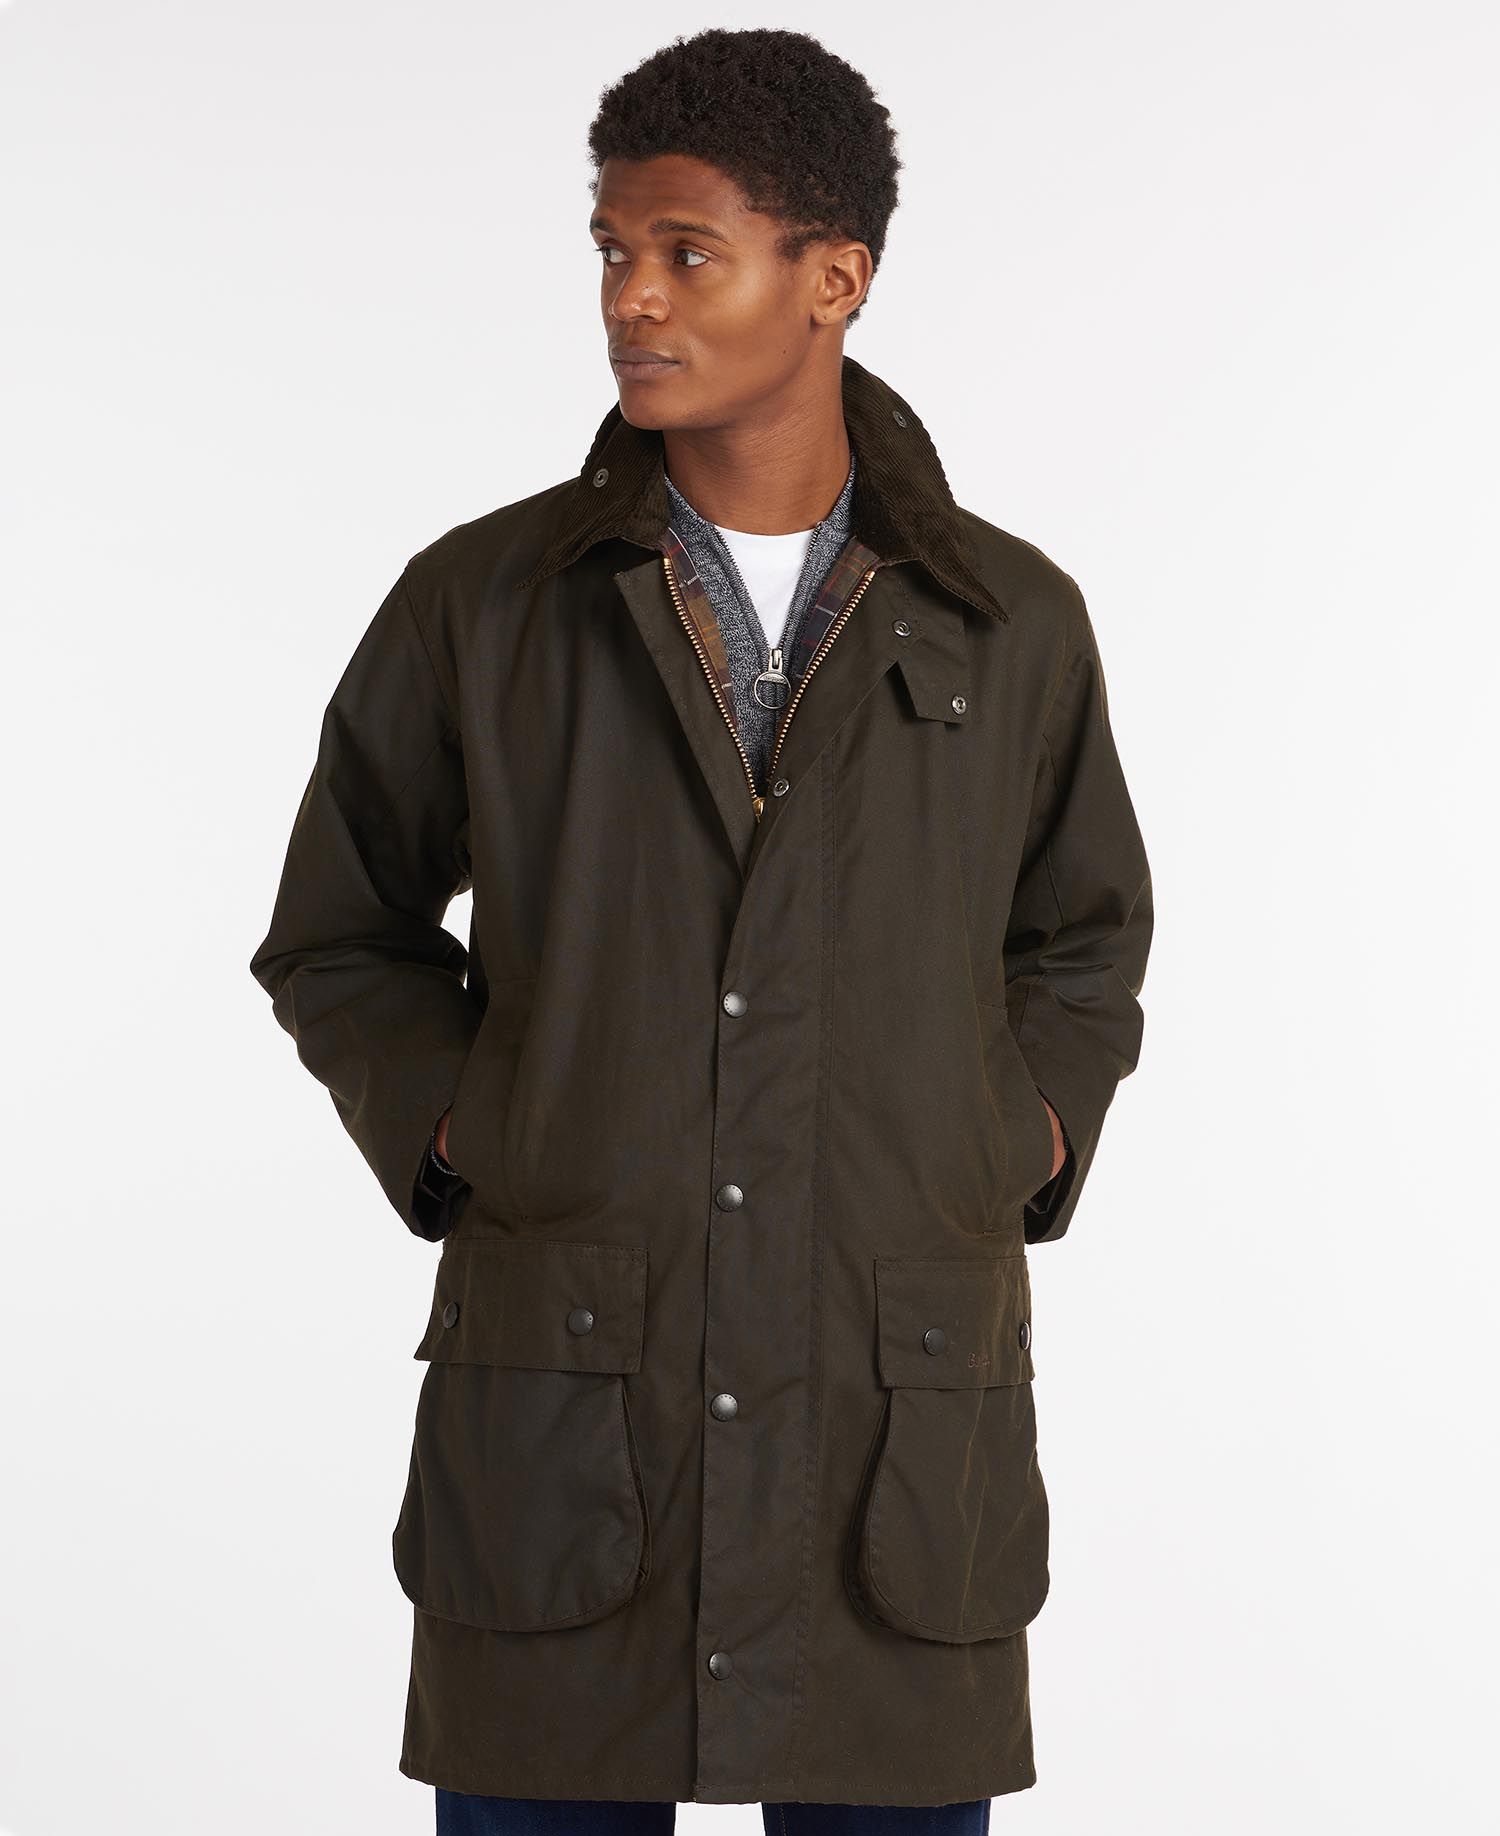 heuvel zout eb Classic Northumbria Wax Jacket in Olive | Barbour